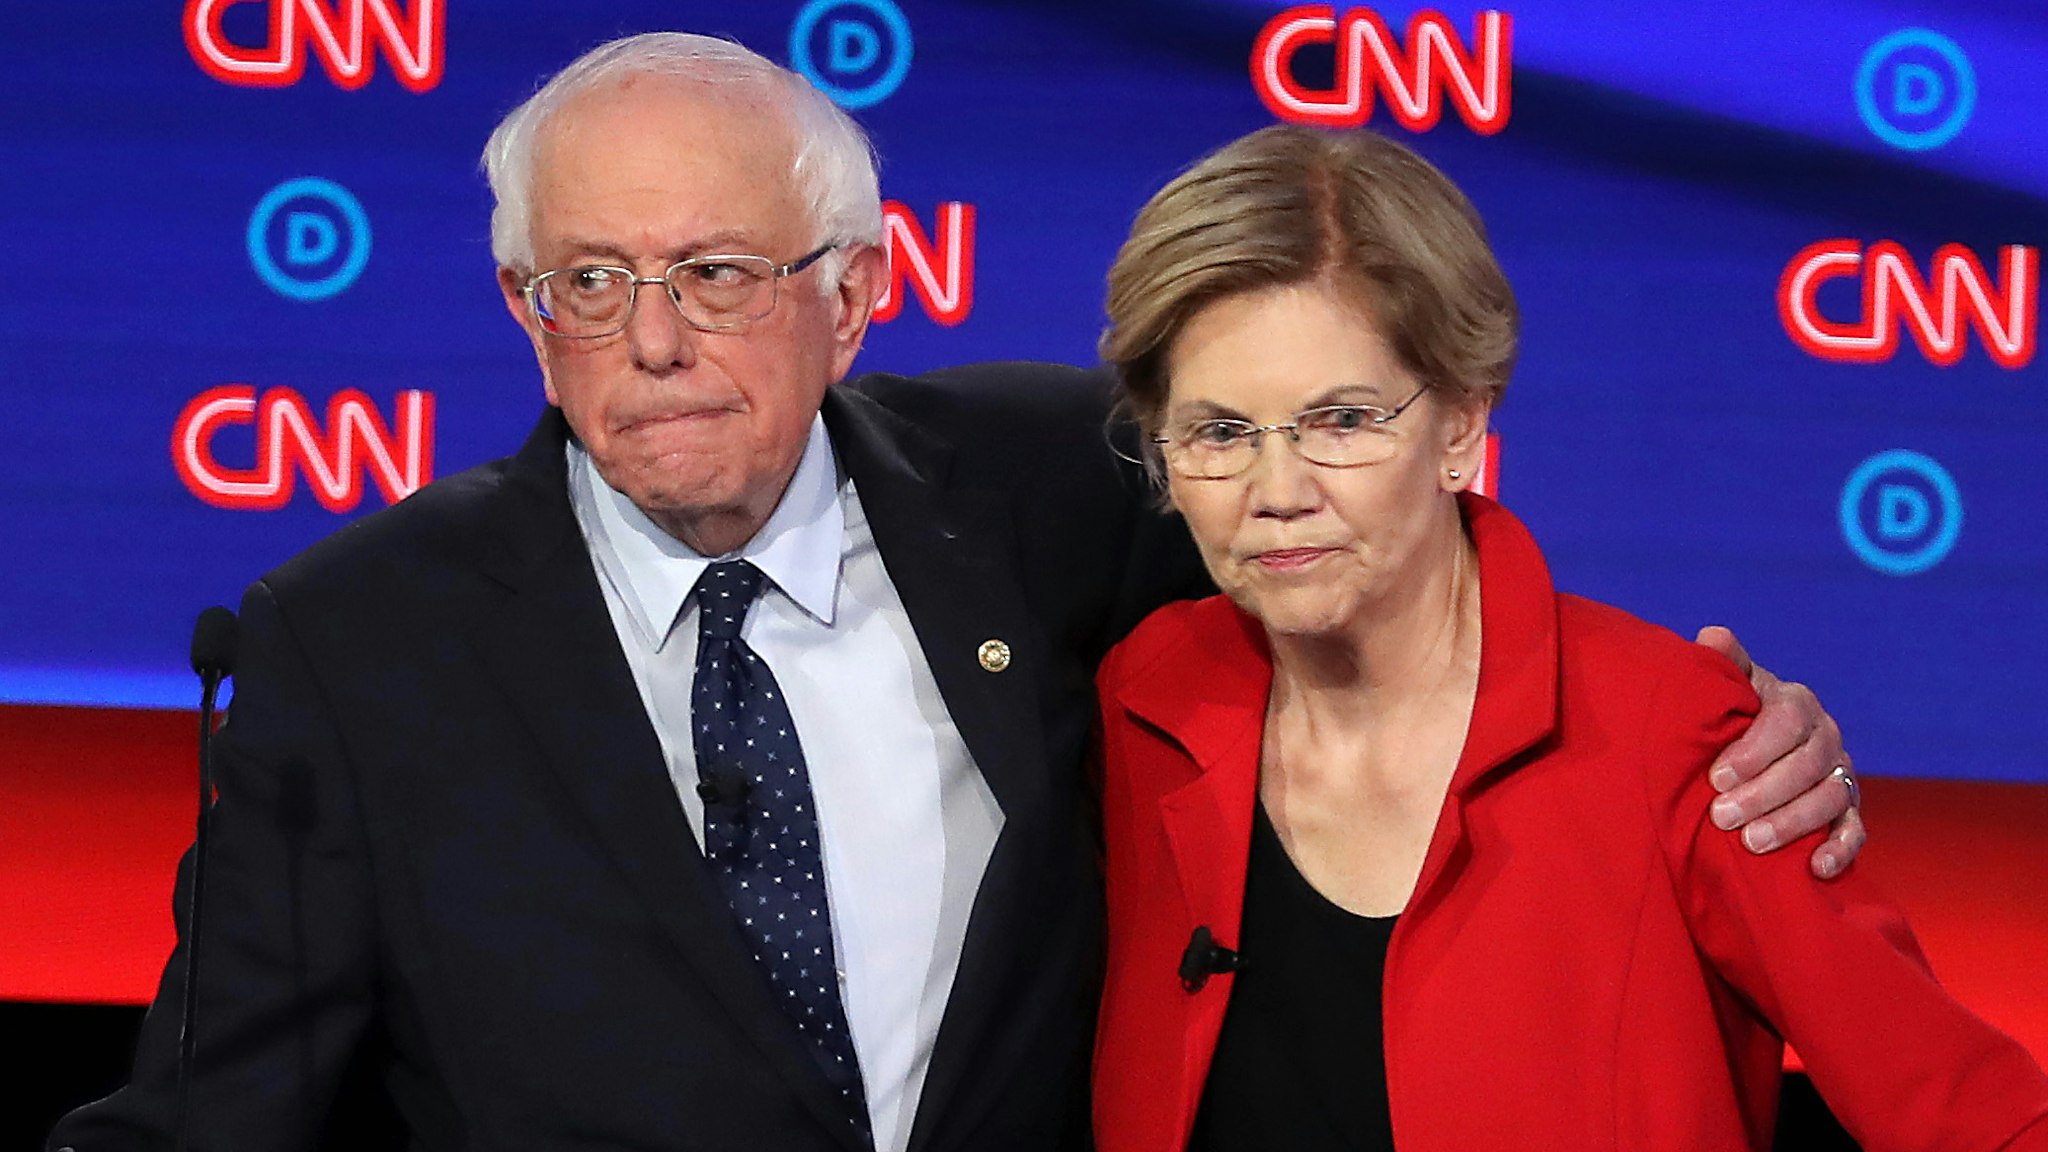 DETROIT, MICHIGAN - JULY 30: Democratic presidential candidate Sen. Bernie Sanders (I-VT) (L) and Sen. Elizabeth Warren (D-MA) embrace after the Democratic Presidential Debate at the Fox Theatre July 30, 2019 in Detroit, Michigan. 20 Democratic presidential candidates were split into two groups of 10 to take part in the debate sponsored by CNN held over two nights at Detroit’s Fox Theatre.